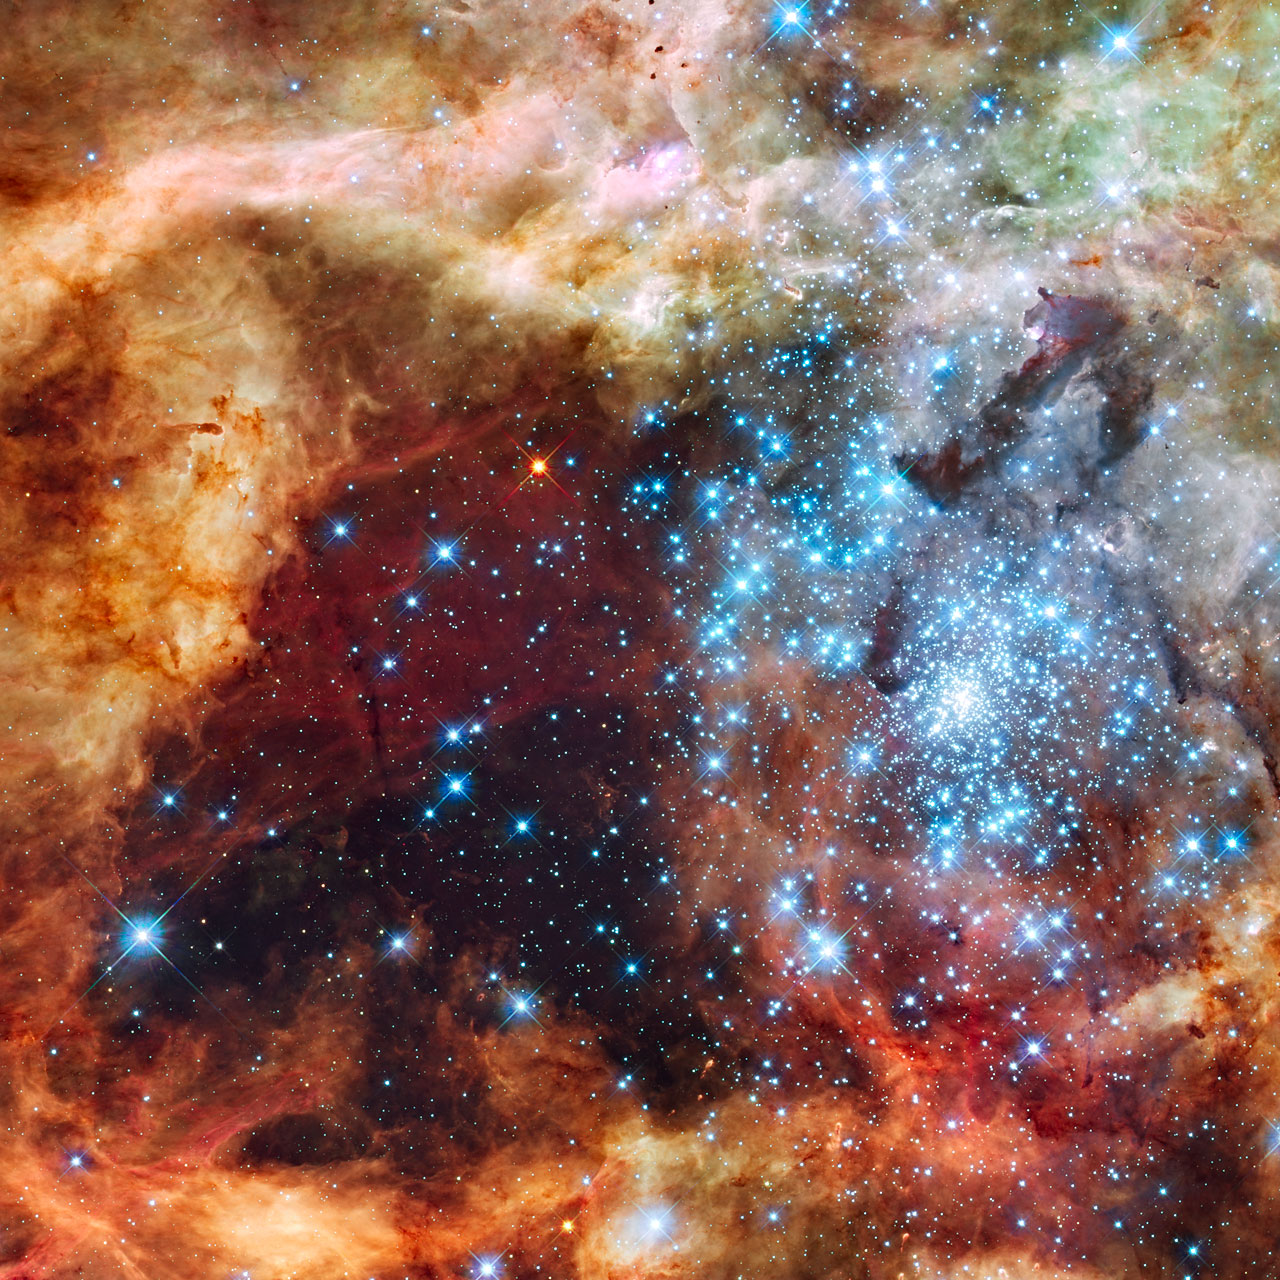 Stars appear to form and shine brightly in a Hubble Telescope image